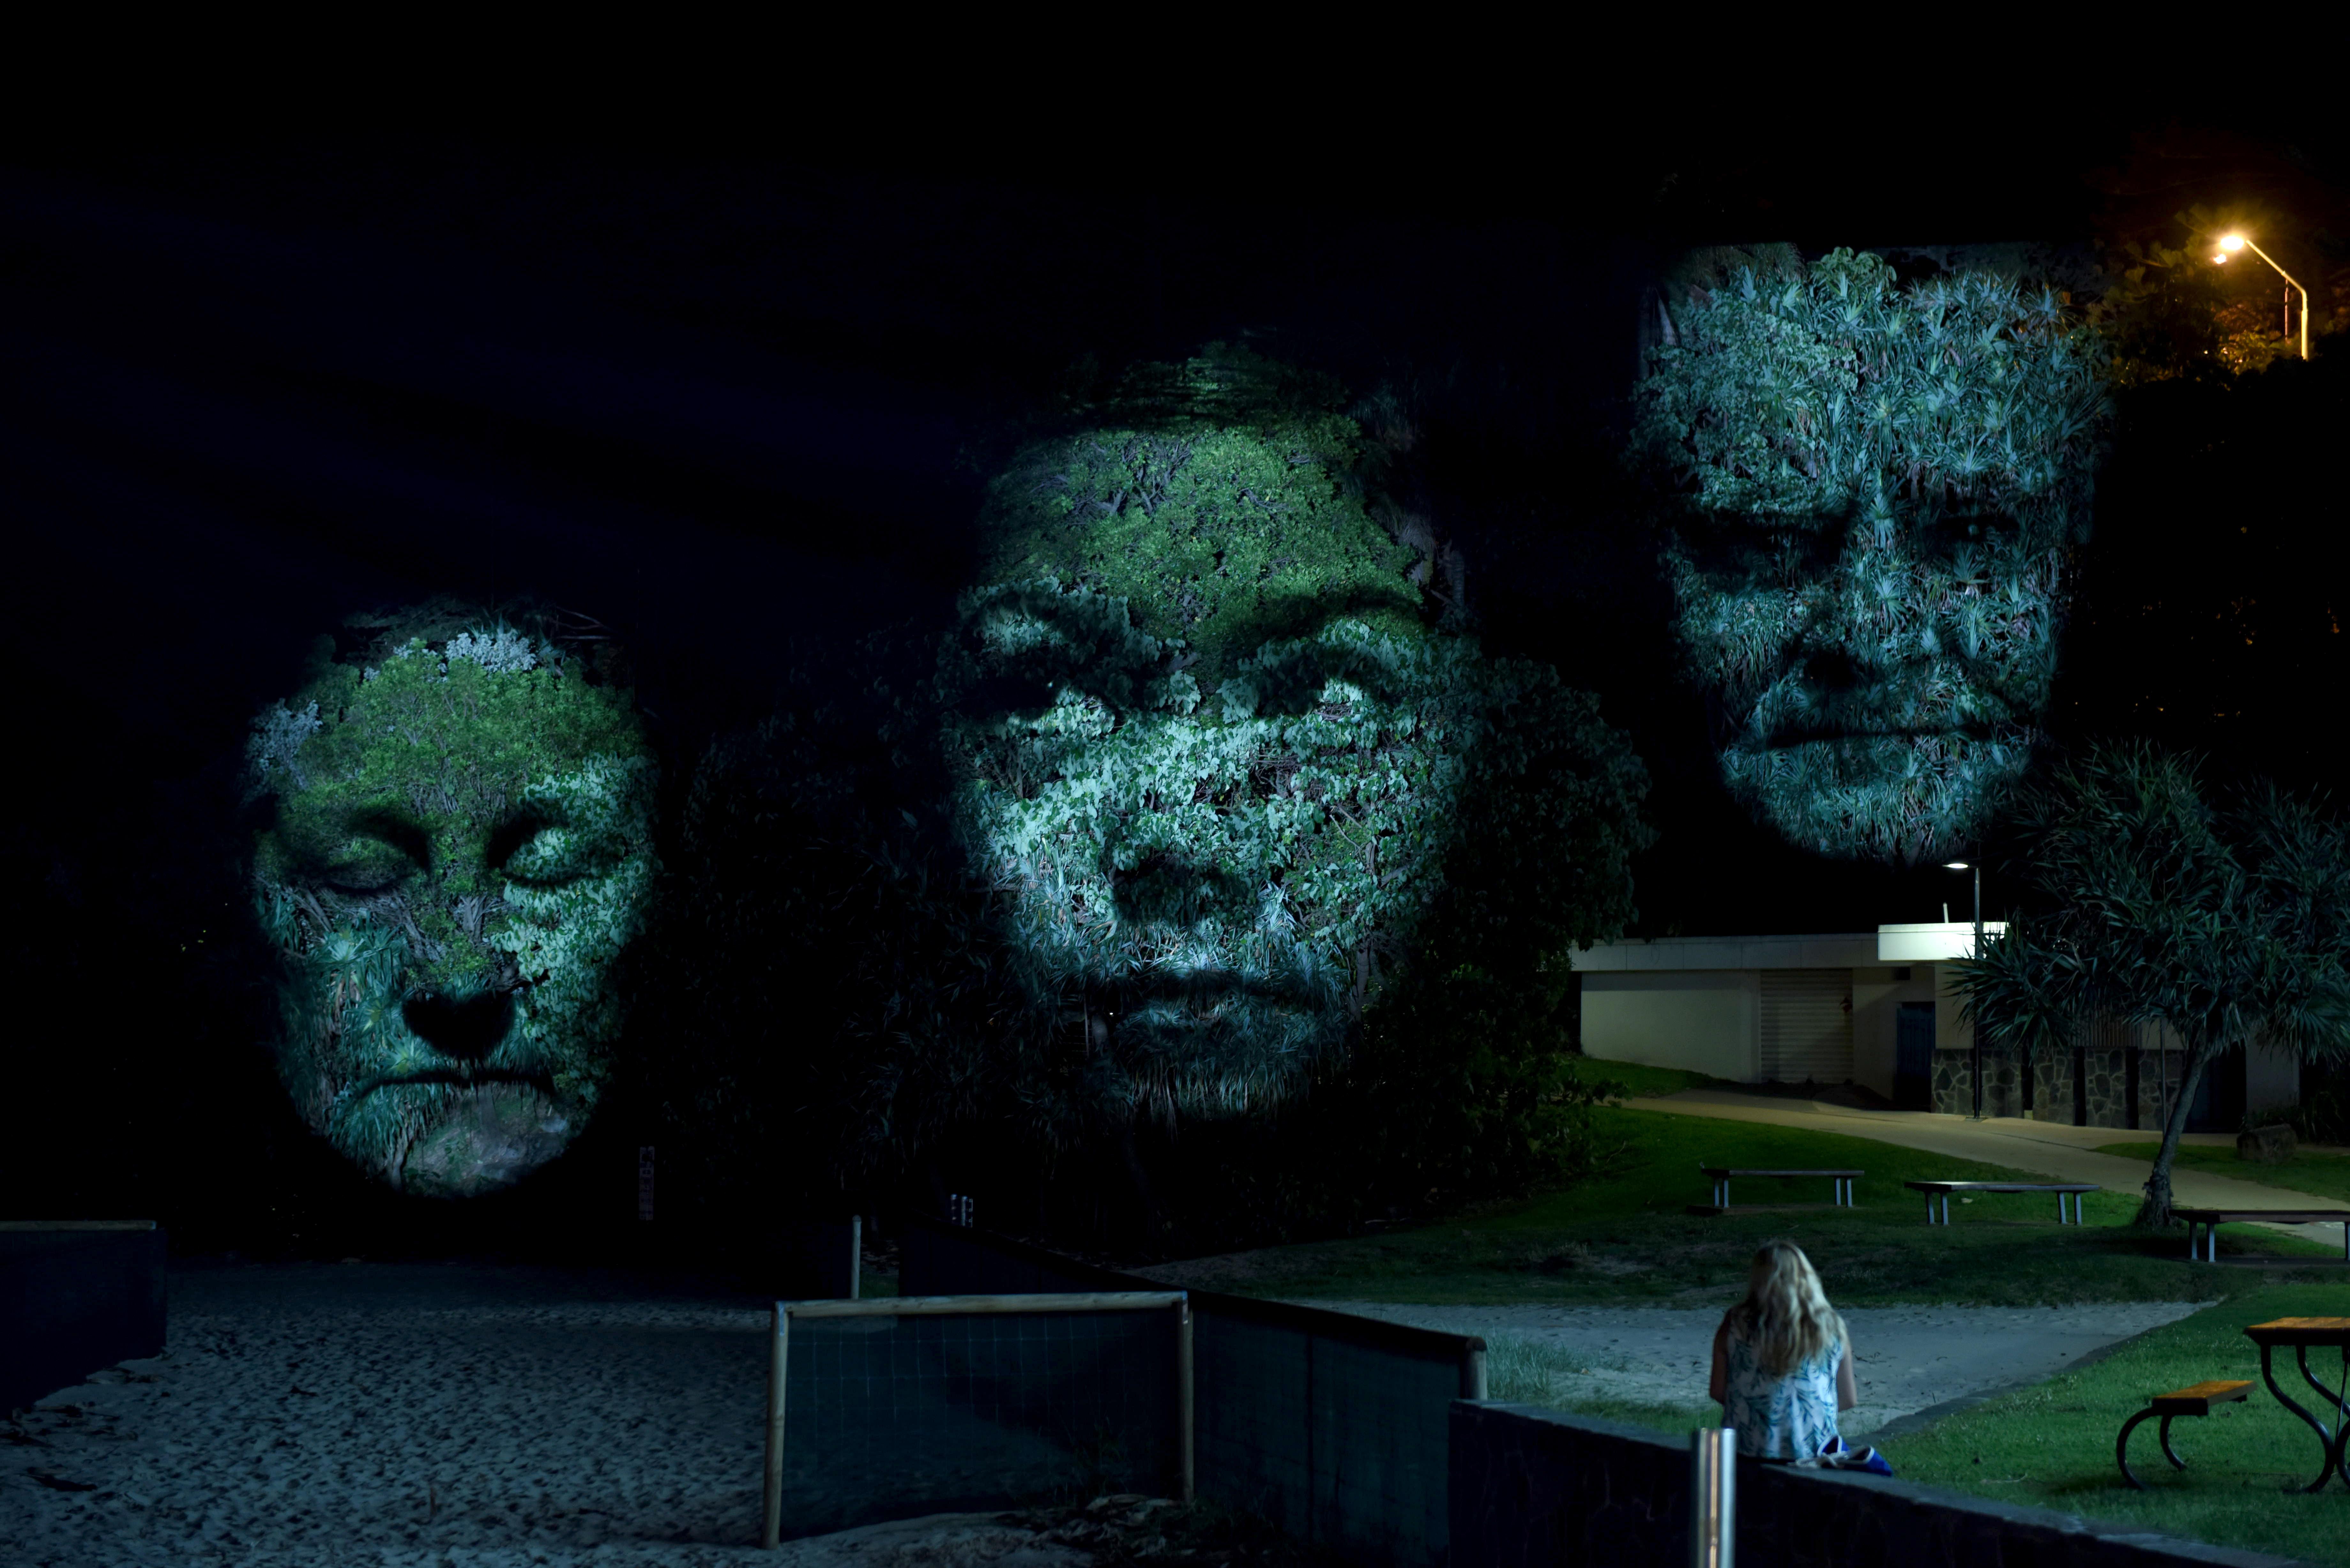 Three projected faces appear on trees in a previous installation of Craig Walsh's Monuments